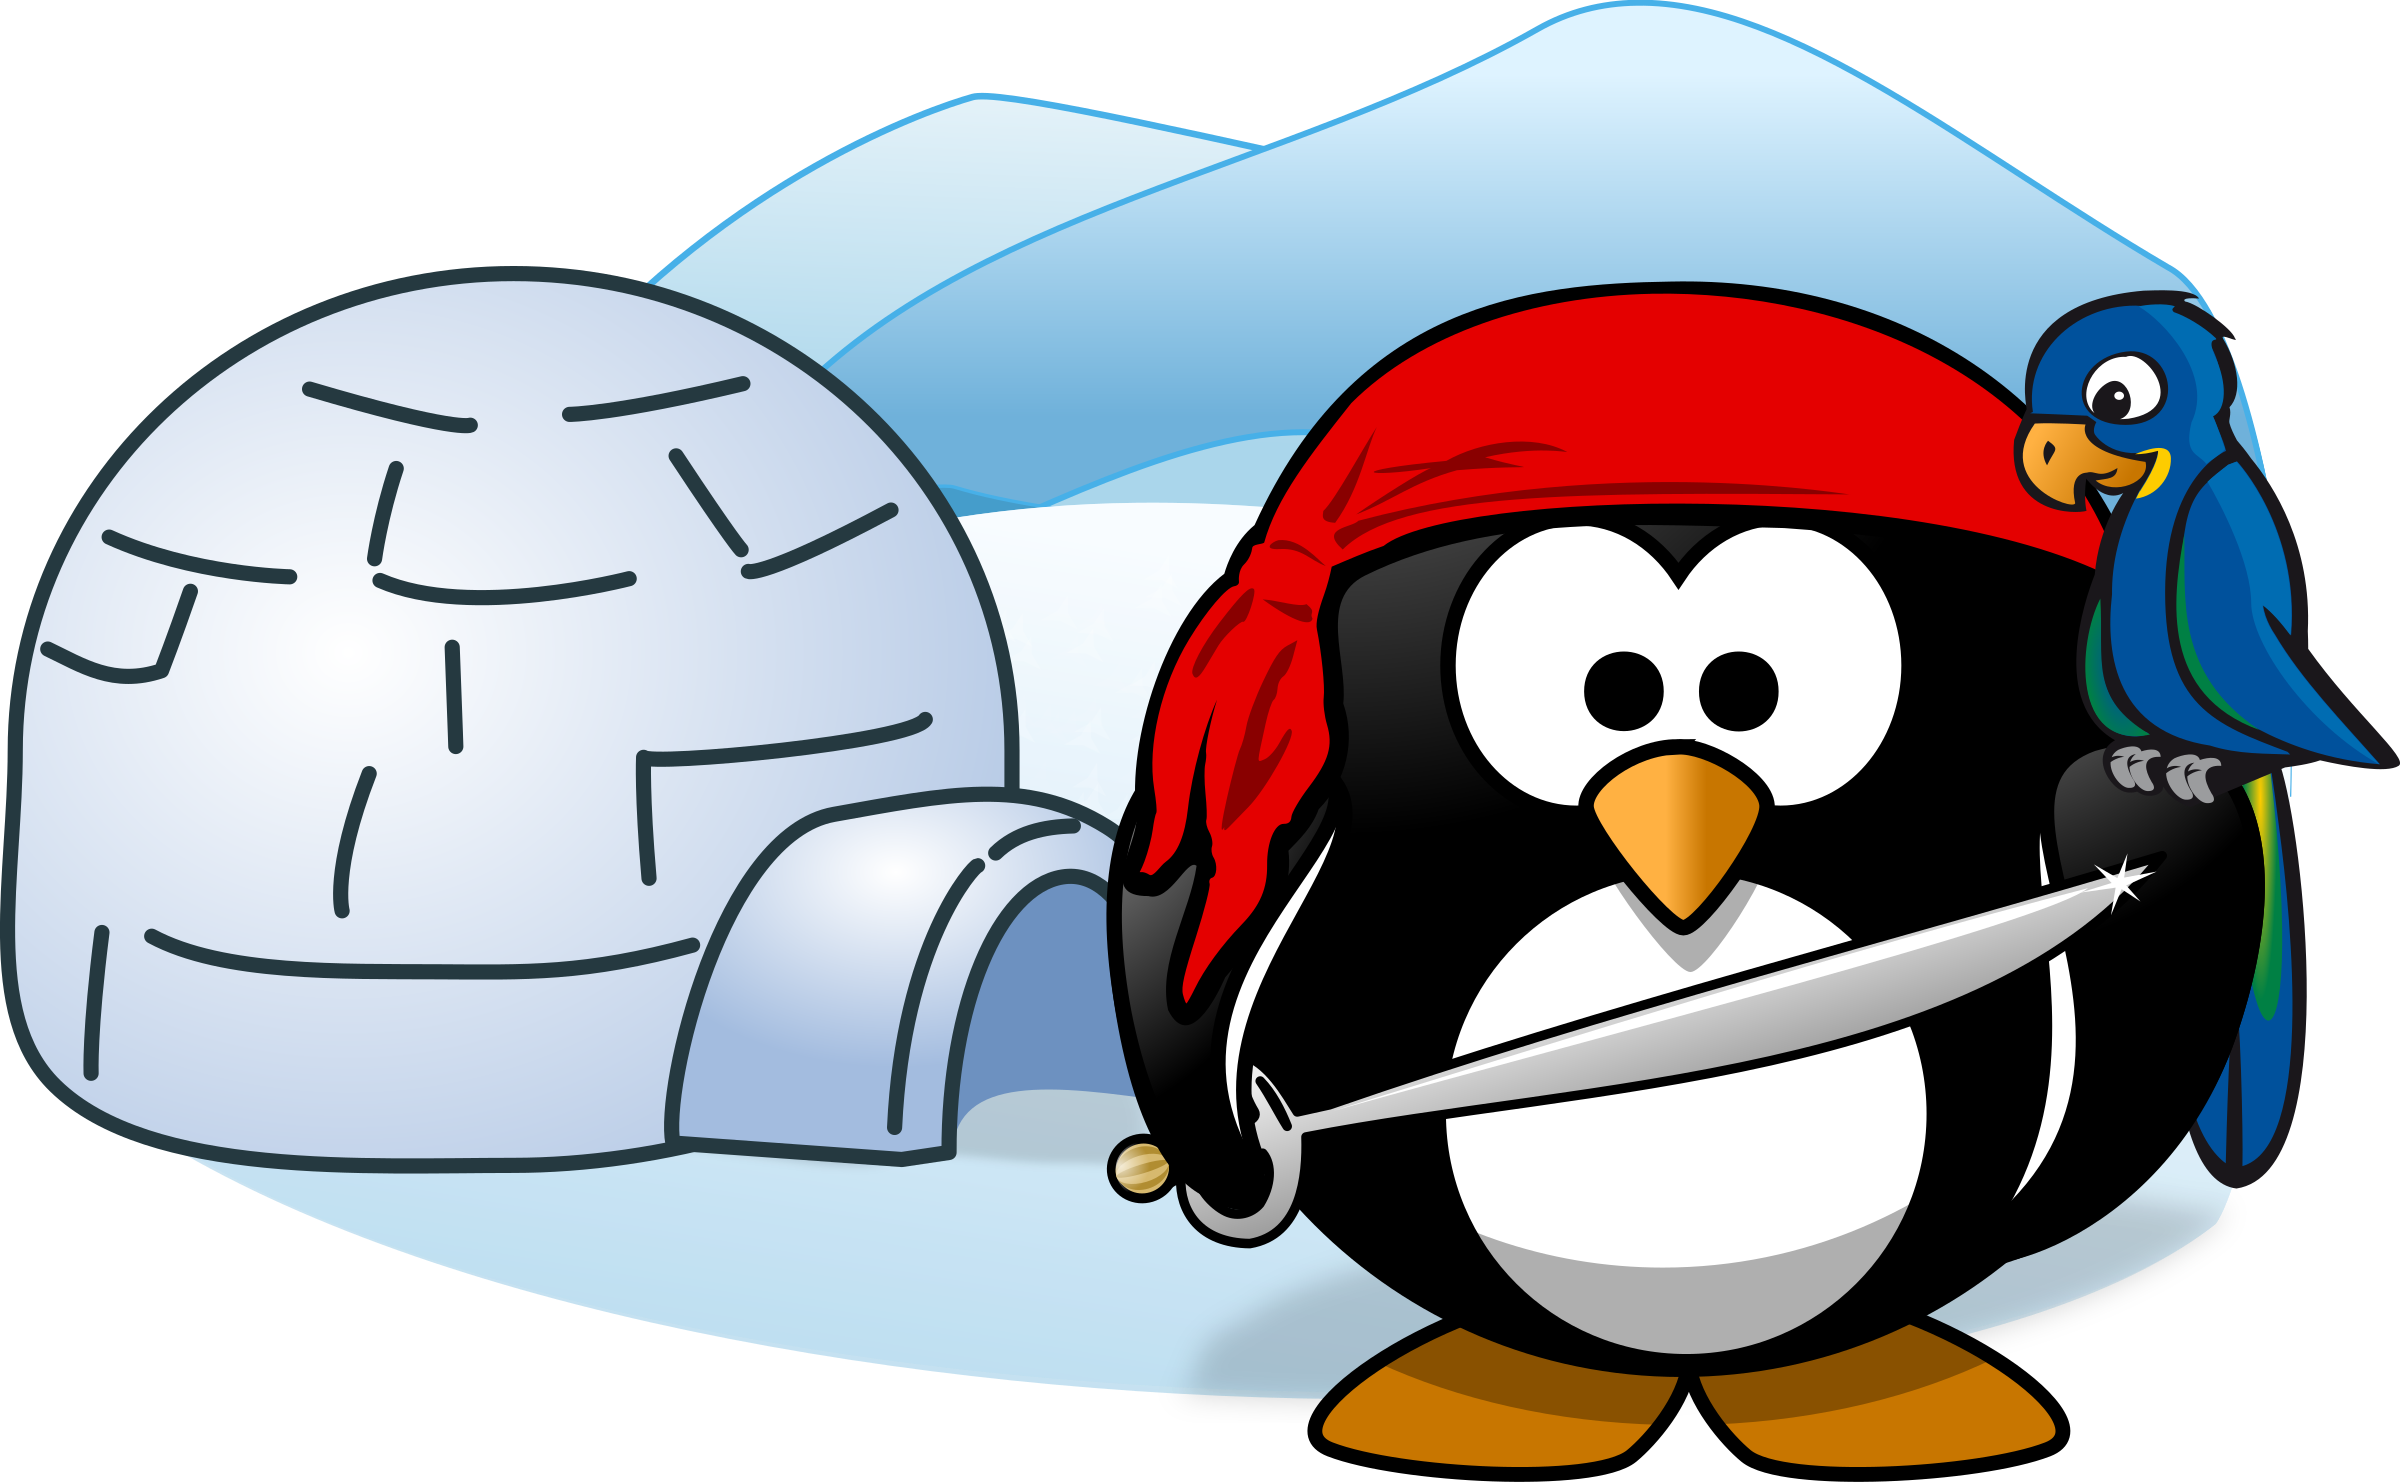 Gif clipart images of antarctica.